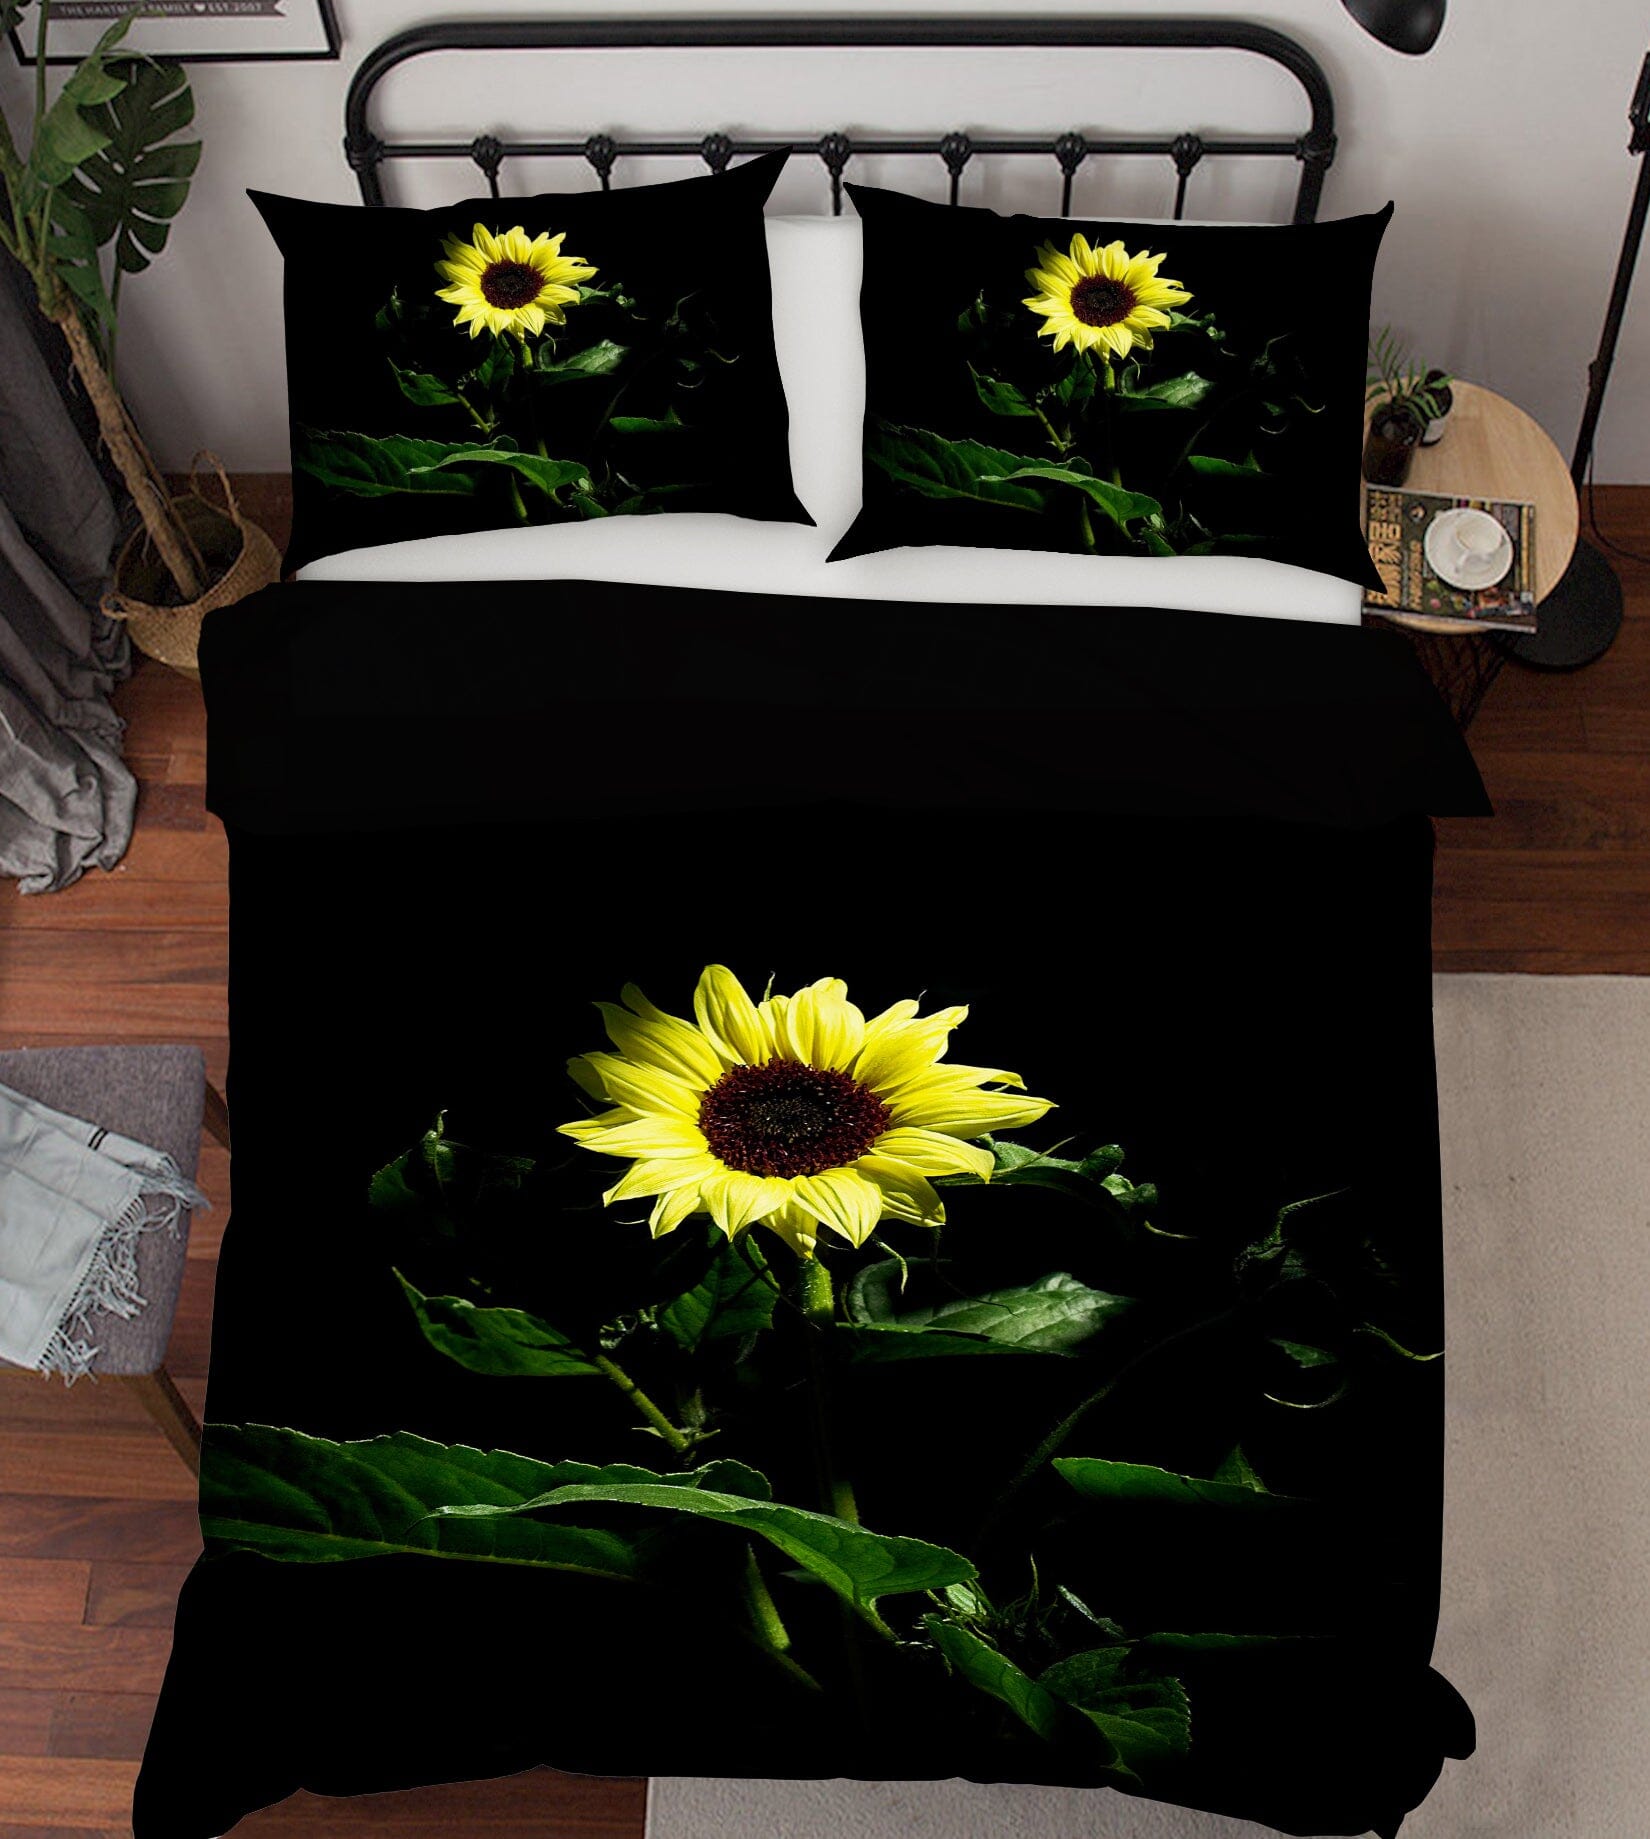 3D Sunflower 2130 Kathy Barefield Bedding Bed Pillowcases Quilt Quiet Covers AJ Creativity Home 